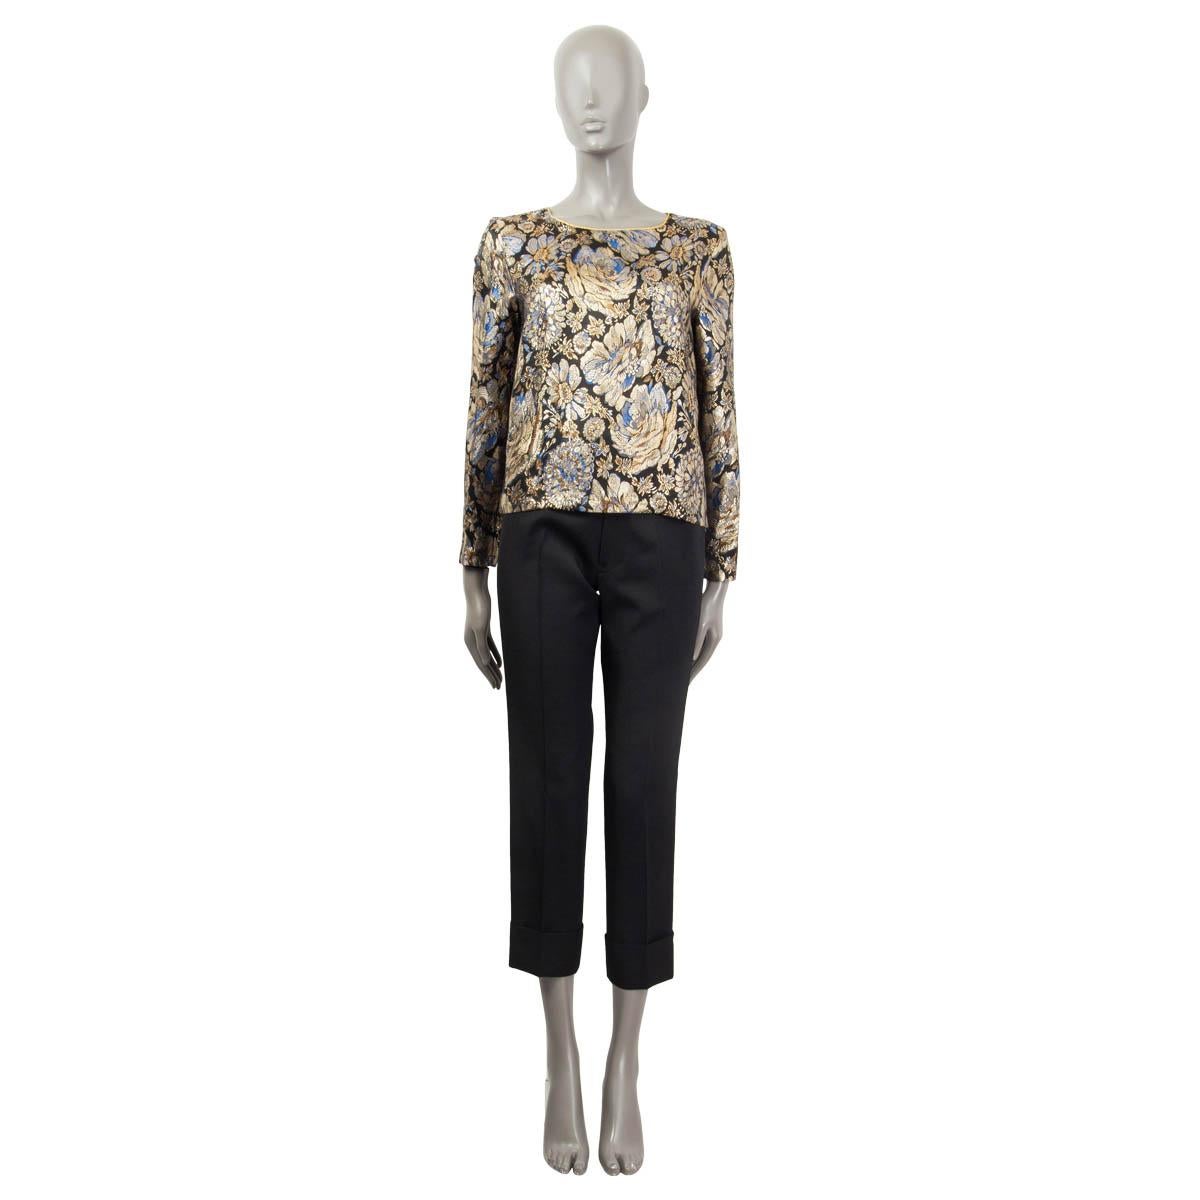 100% authentic Class By R.Cavallie floral jacquard blouse in gold, black, camel and blue acetate (93%) and metallised fiber (7%). Features a self-tie bow at the back and long sleeves. Opens with a zipper at the side. Lined in black polyester (100%).